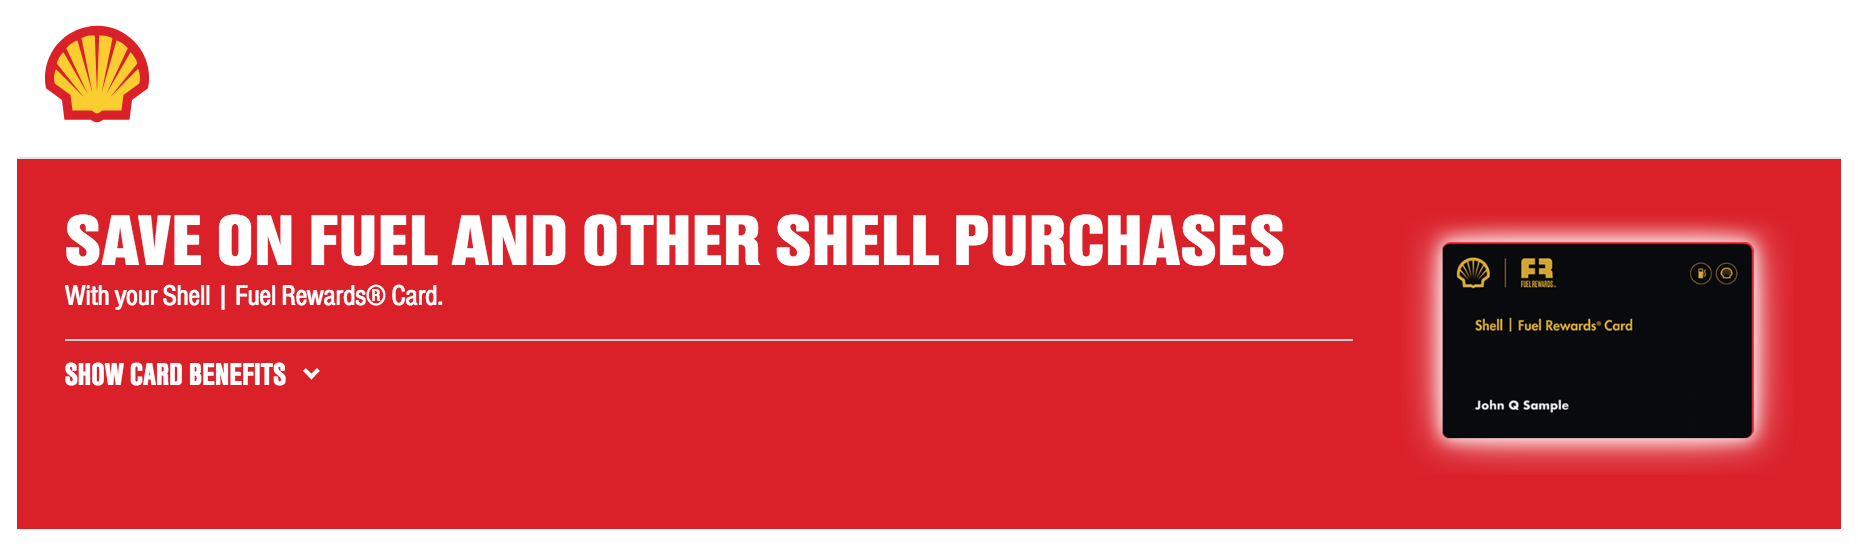 shell-credit-cards-review-are-they-worth-it-2020